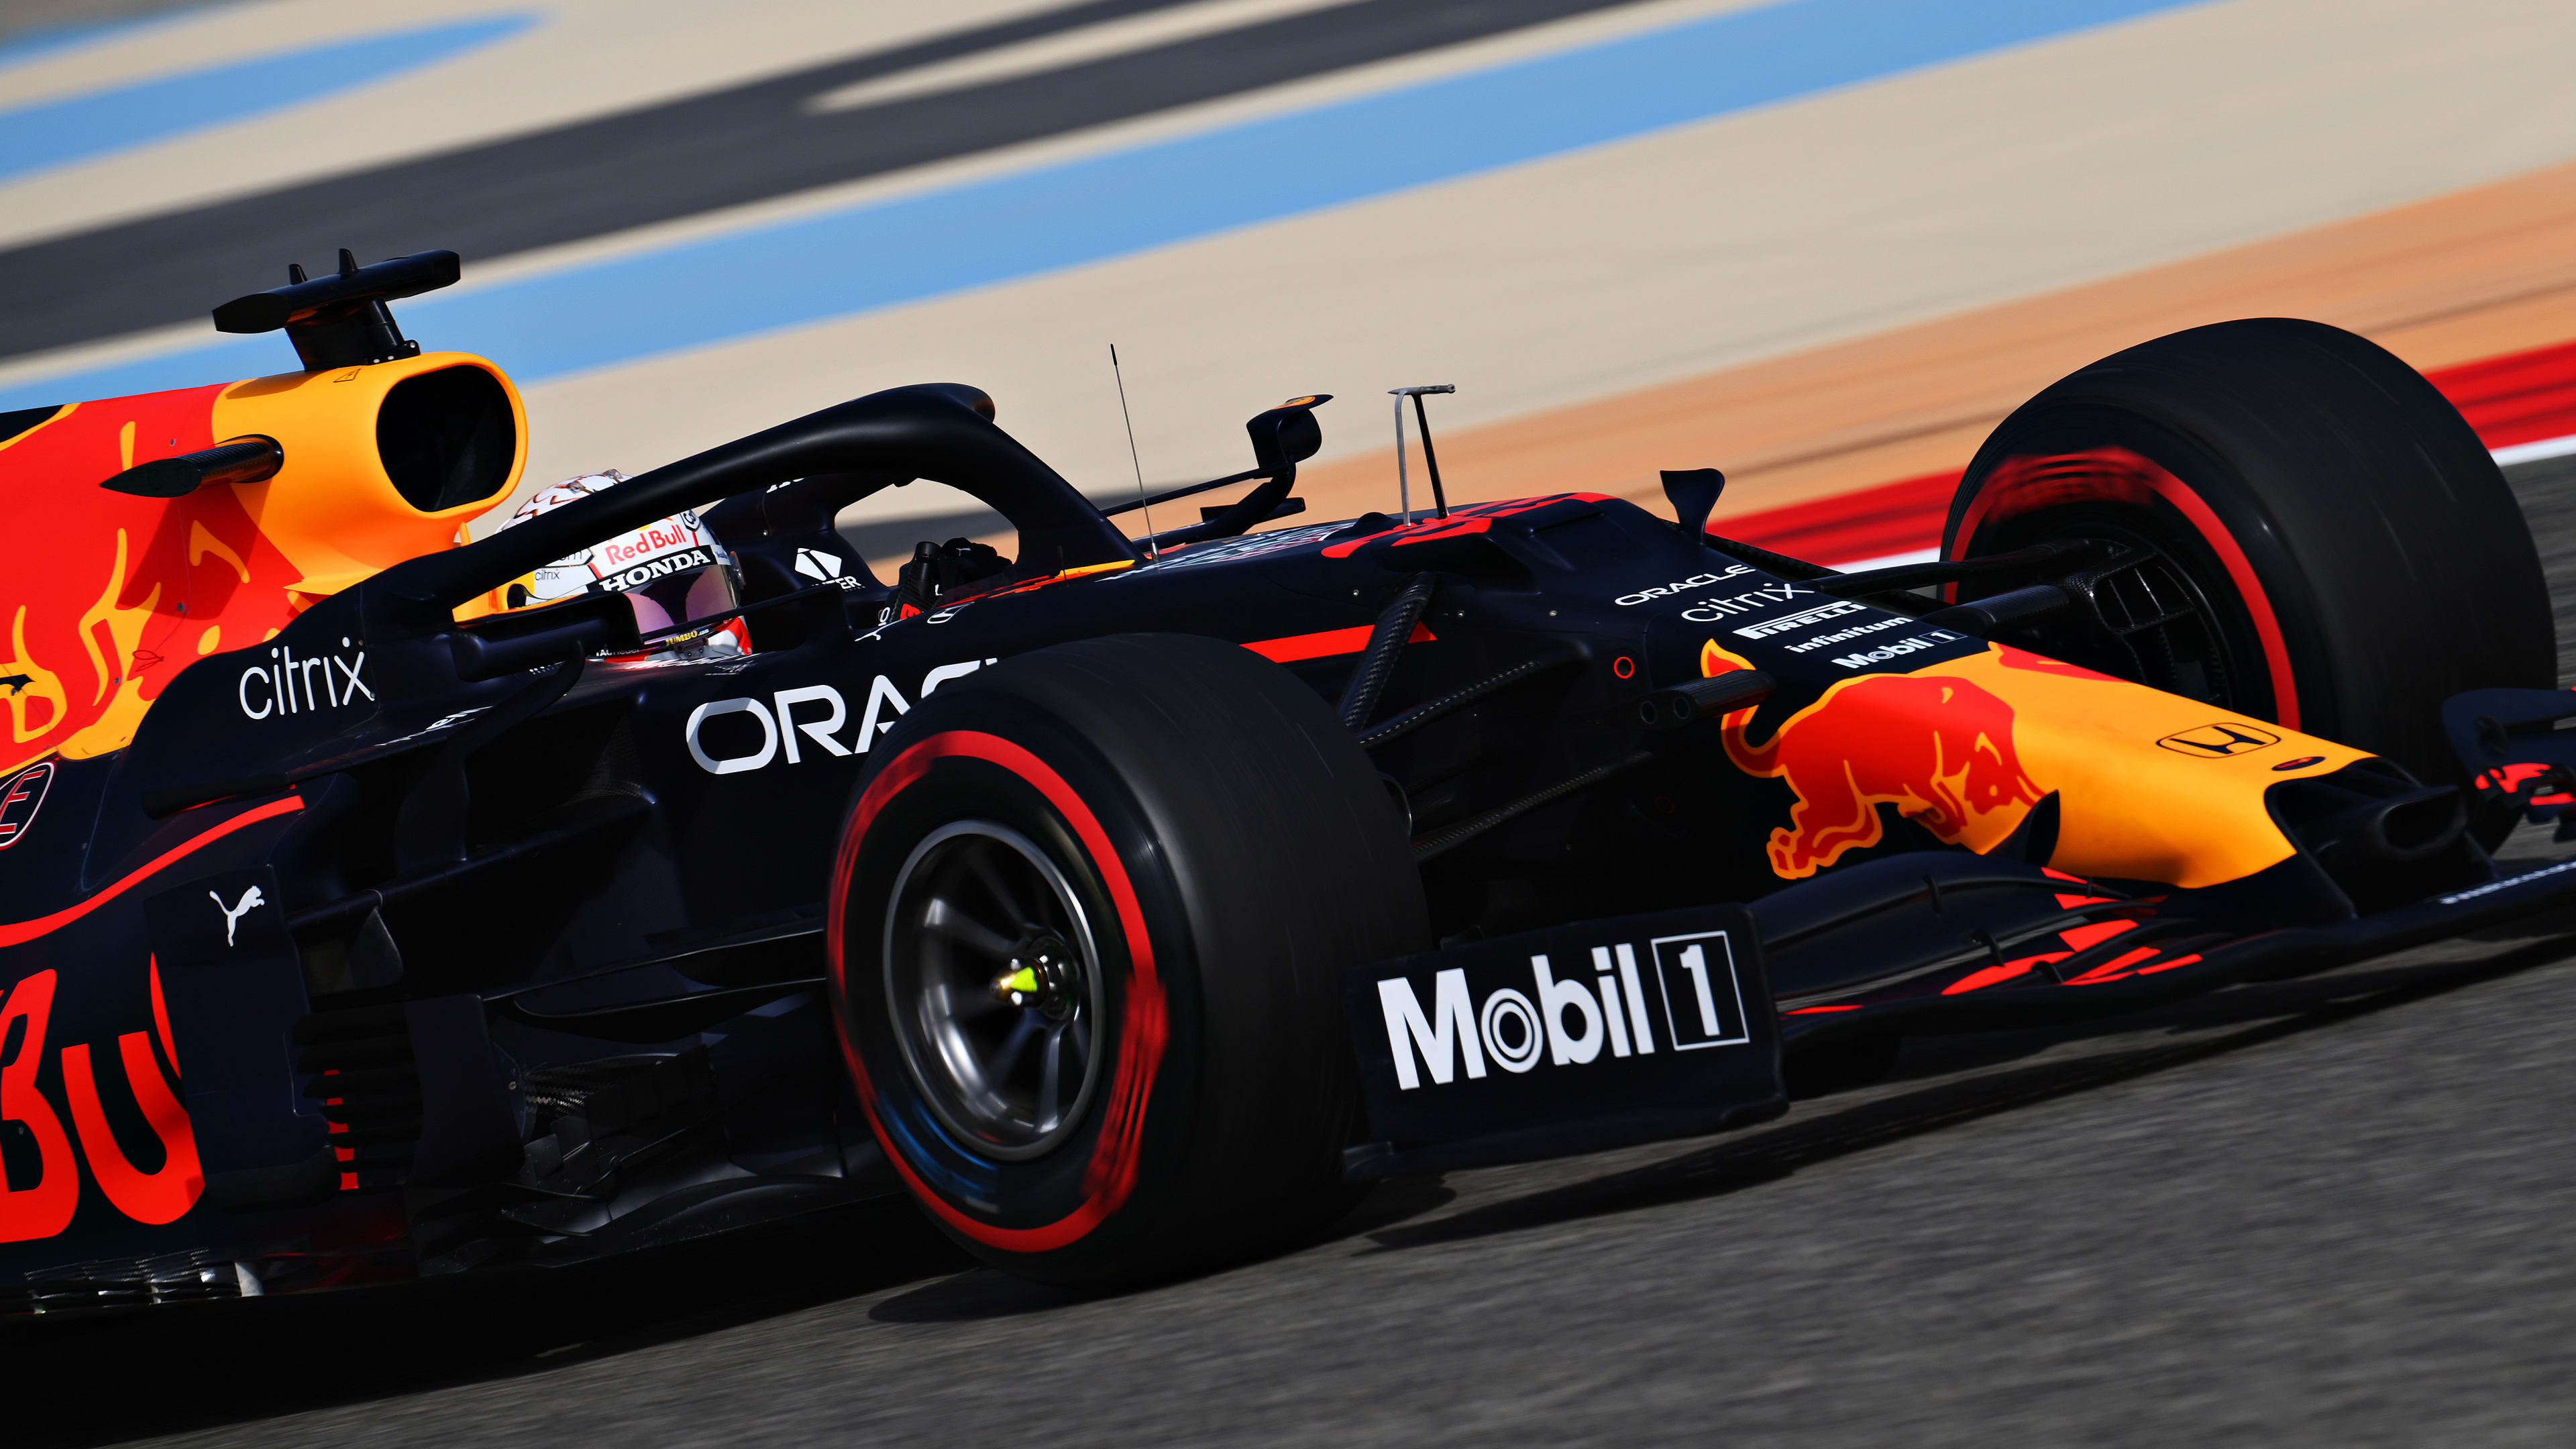 Eerste Grand Prix 2021 2021 Bahrain Grand Prix Fp1 Report And Highlights Max Verstappen Quickest In First Practice In Bahrain As 2021 Season Gets Up And Running Formula 1